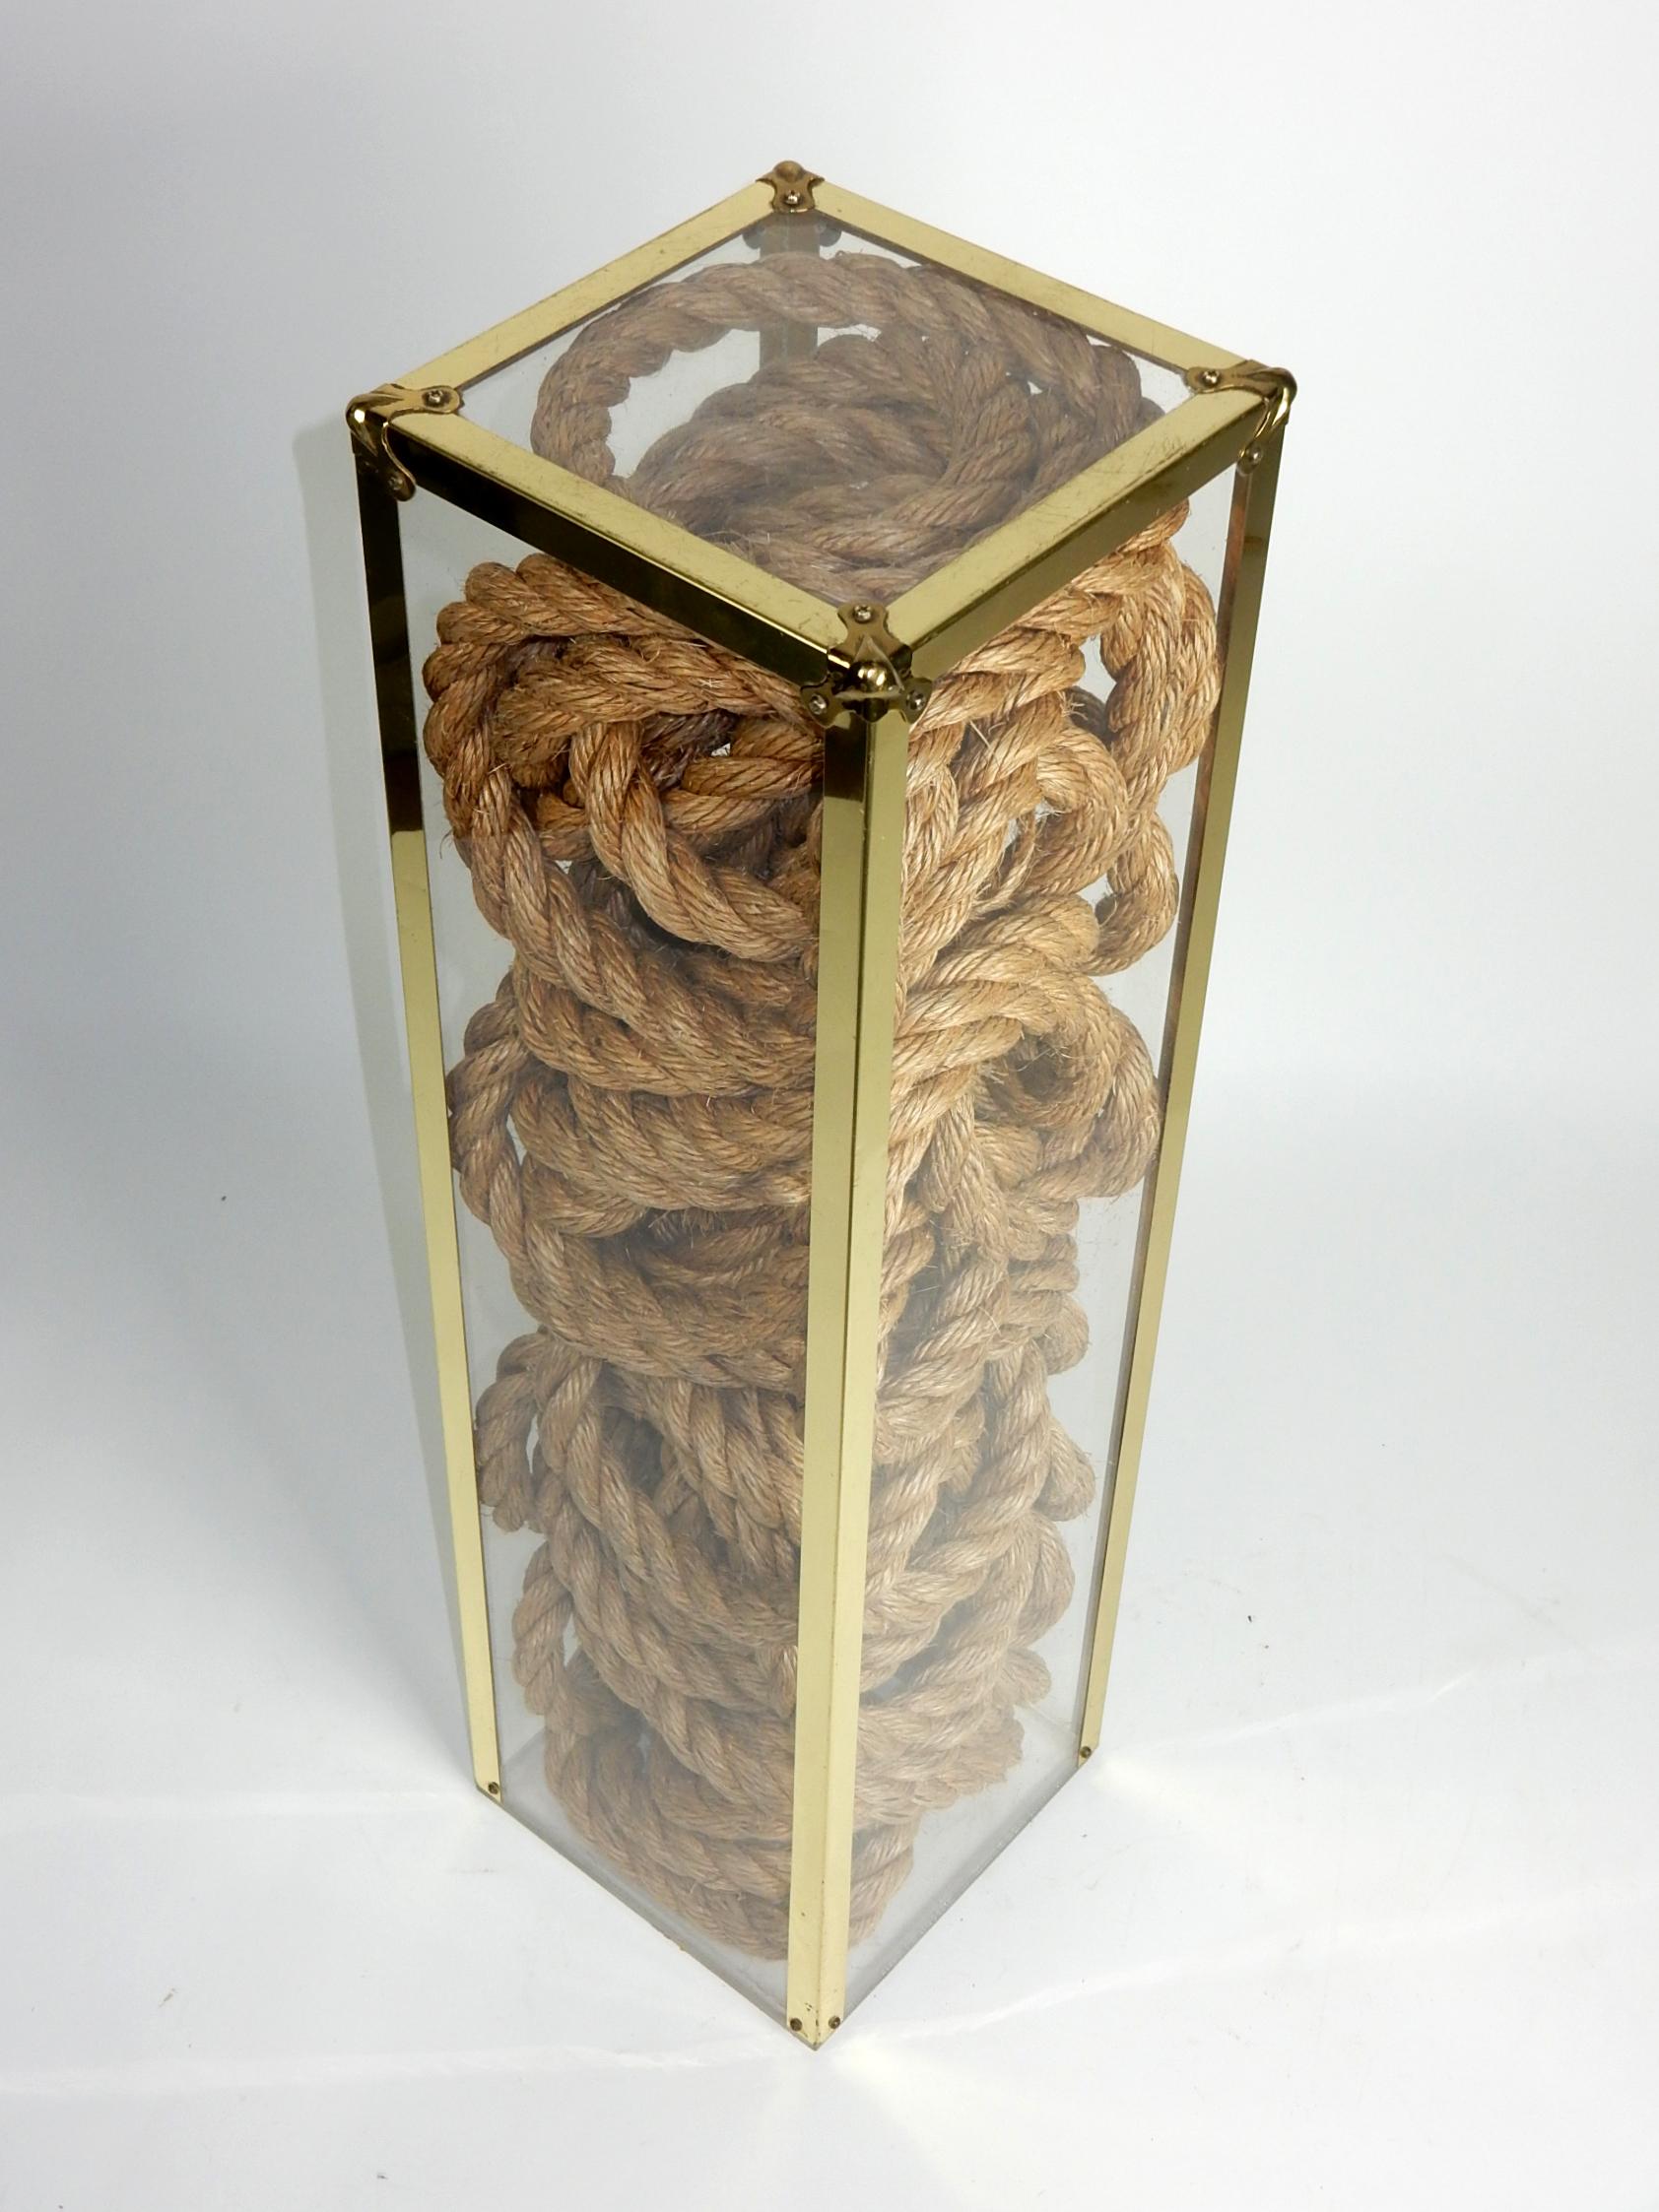 Hemp rope encased in plexiglas pedestal circa 1960's.
Brass trimmed, sealed base. Not marked by artist.
32-1/4 inch tall with a center top plexi surface measuring 7-1/4 inch square.

  